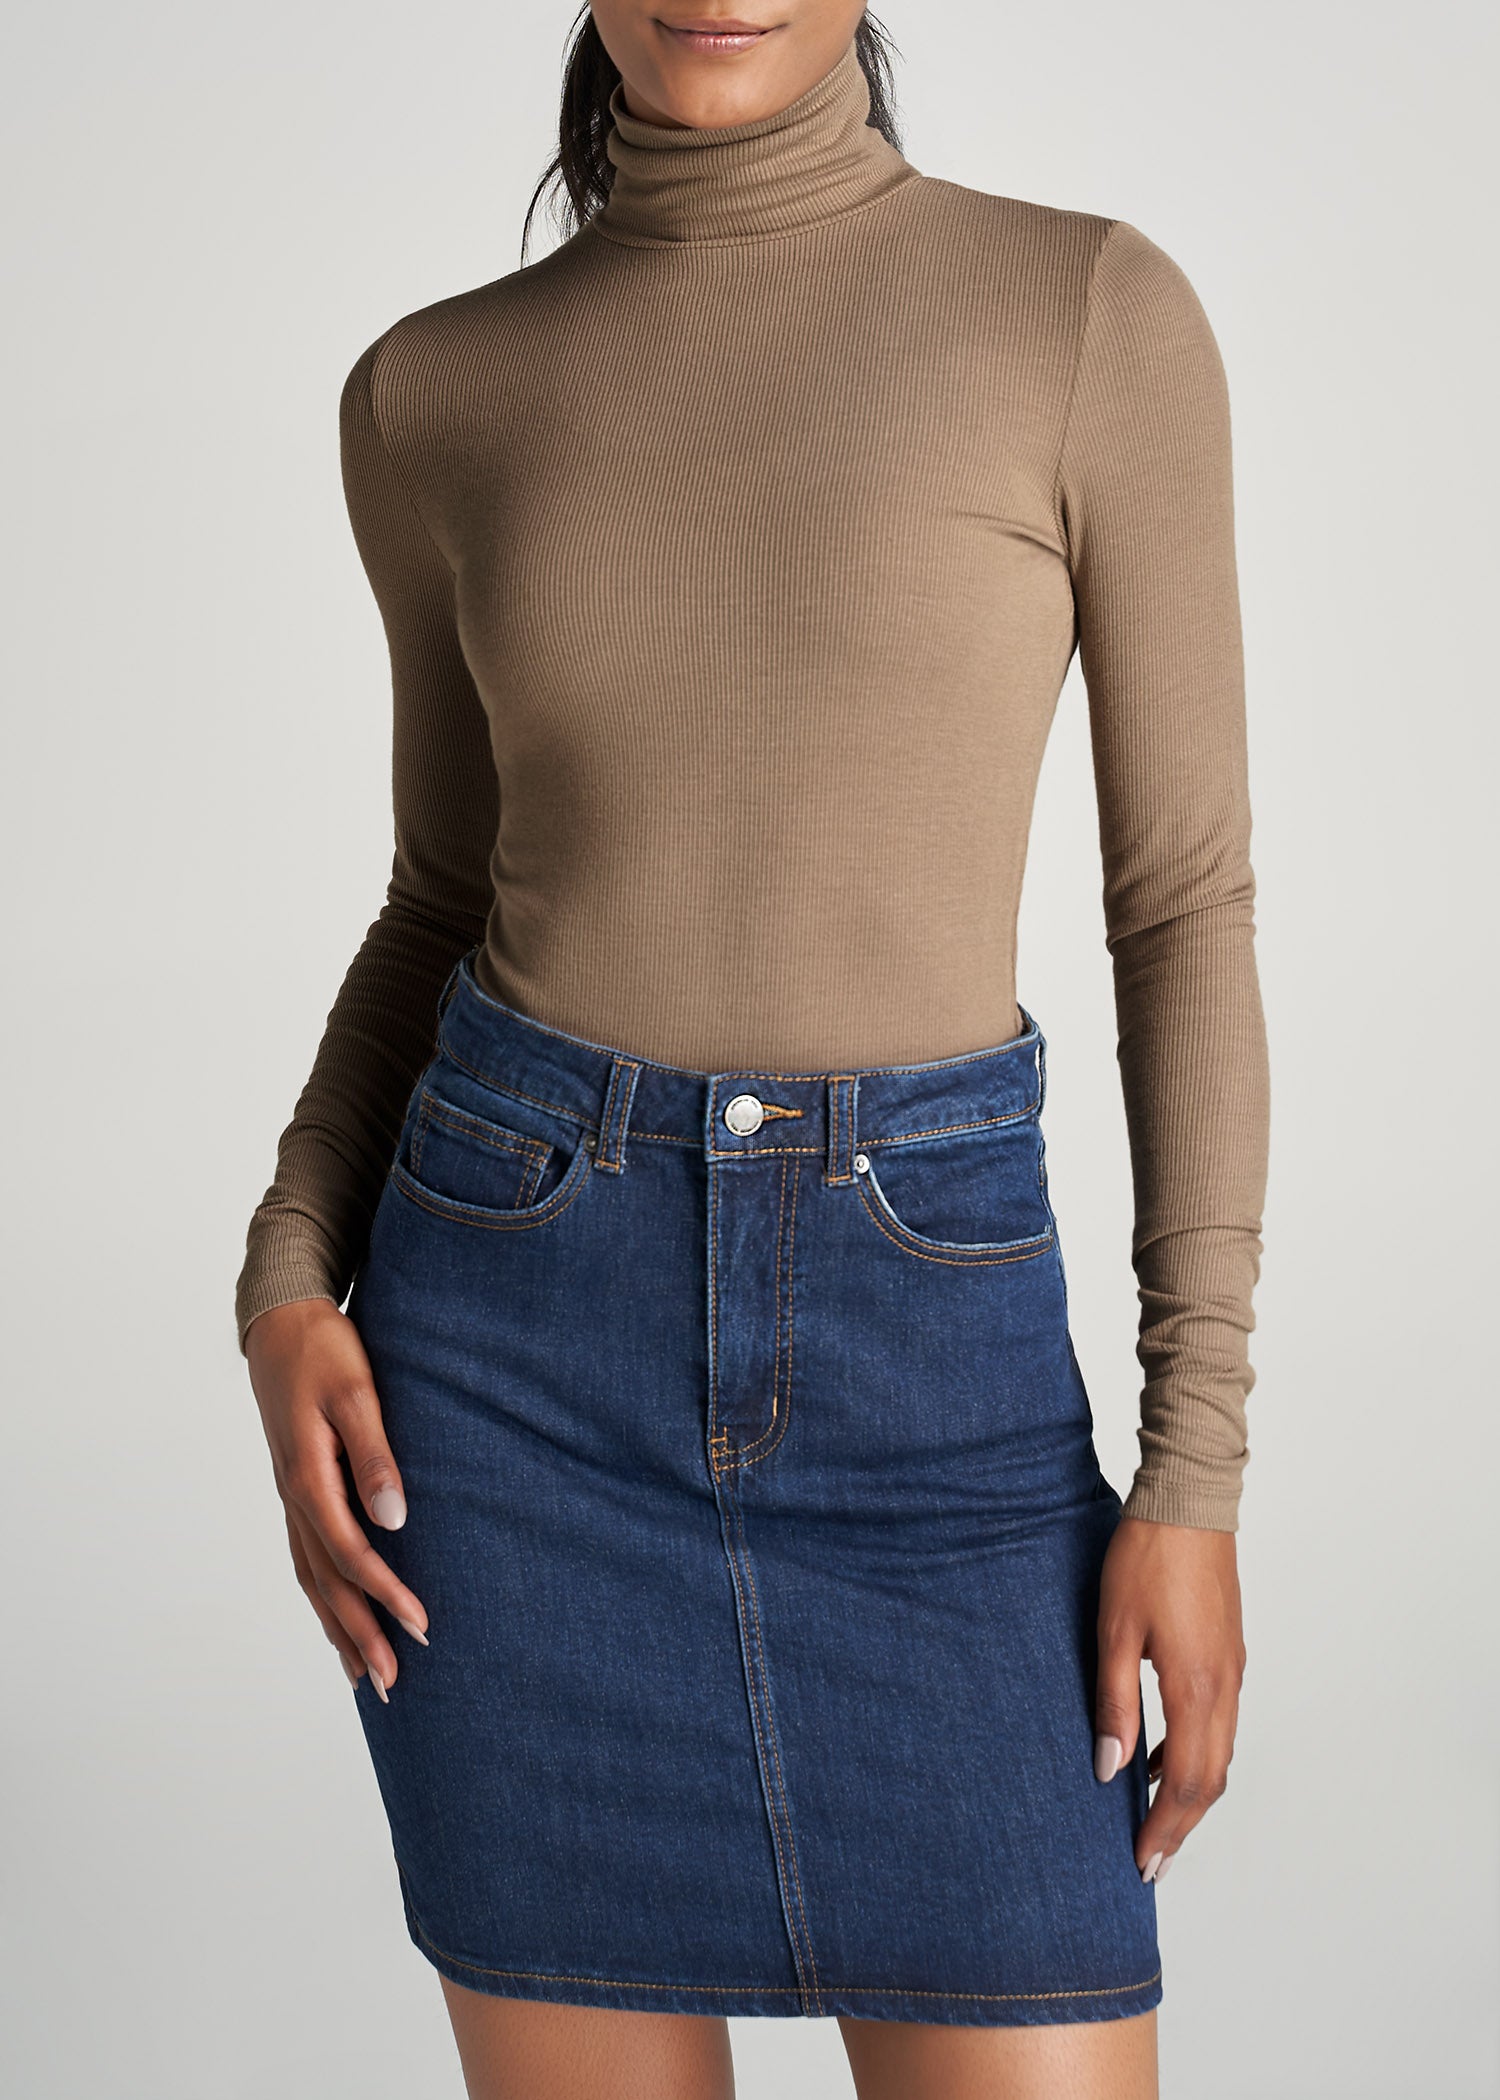 American-Tall-Women-Fitted-LongSleeve-Ribbed-TurtleNeck-Latte-front